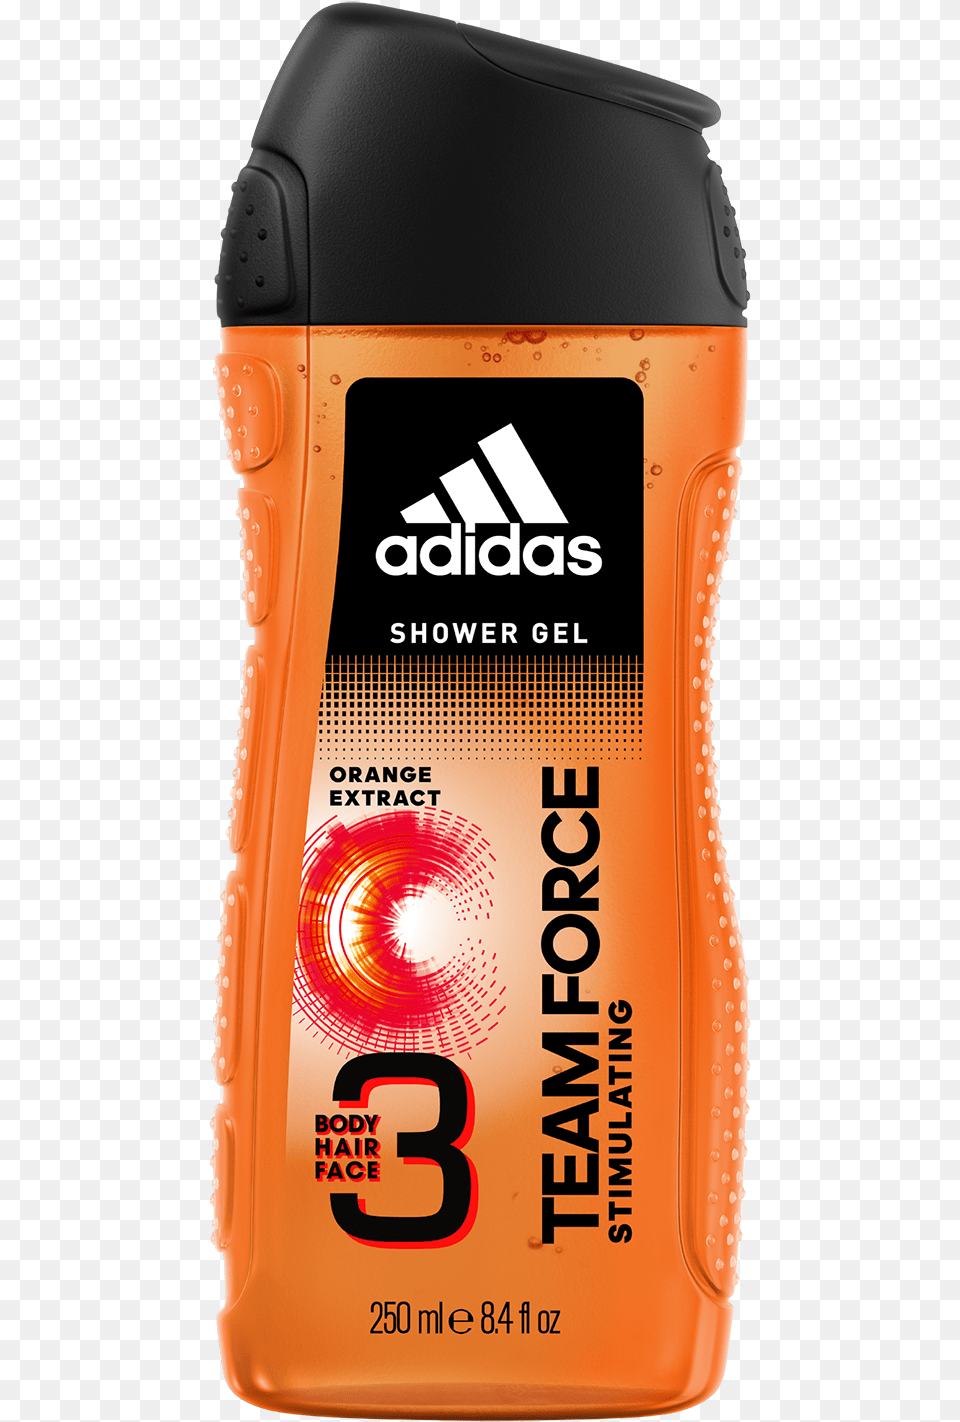 Team Force 3in1 Body Hair And Face Shower Gel For Adidas Shower Gel, Can, Tin, Cosmetics Free Transparent Png